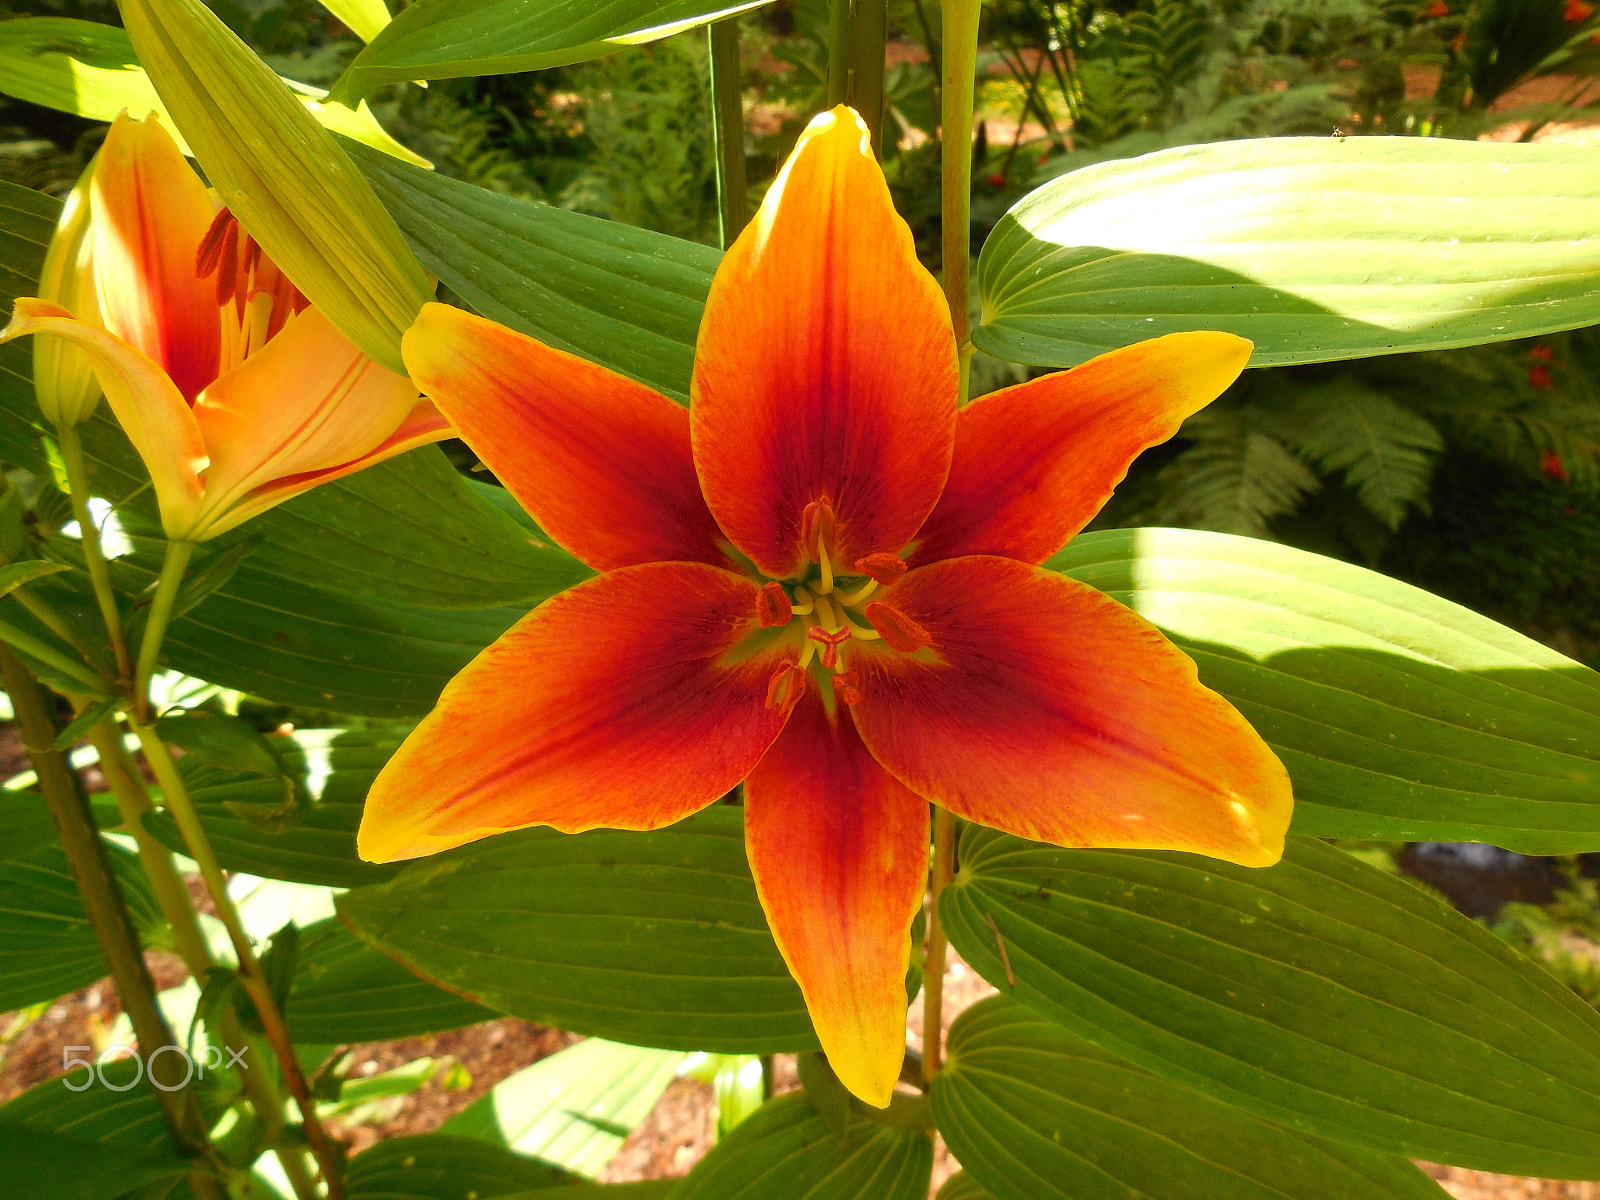 Nikon Coolpix S6500 sample photo. Bright orange and red lily photography